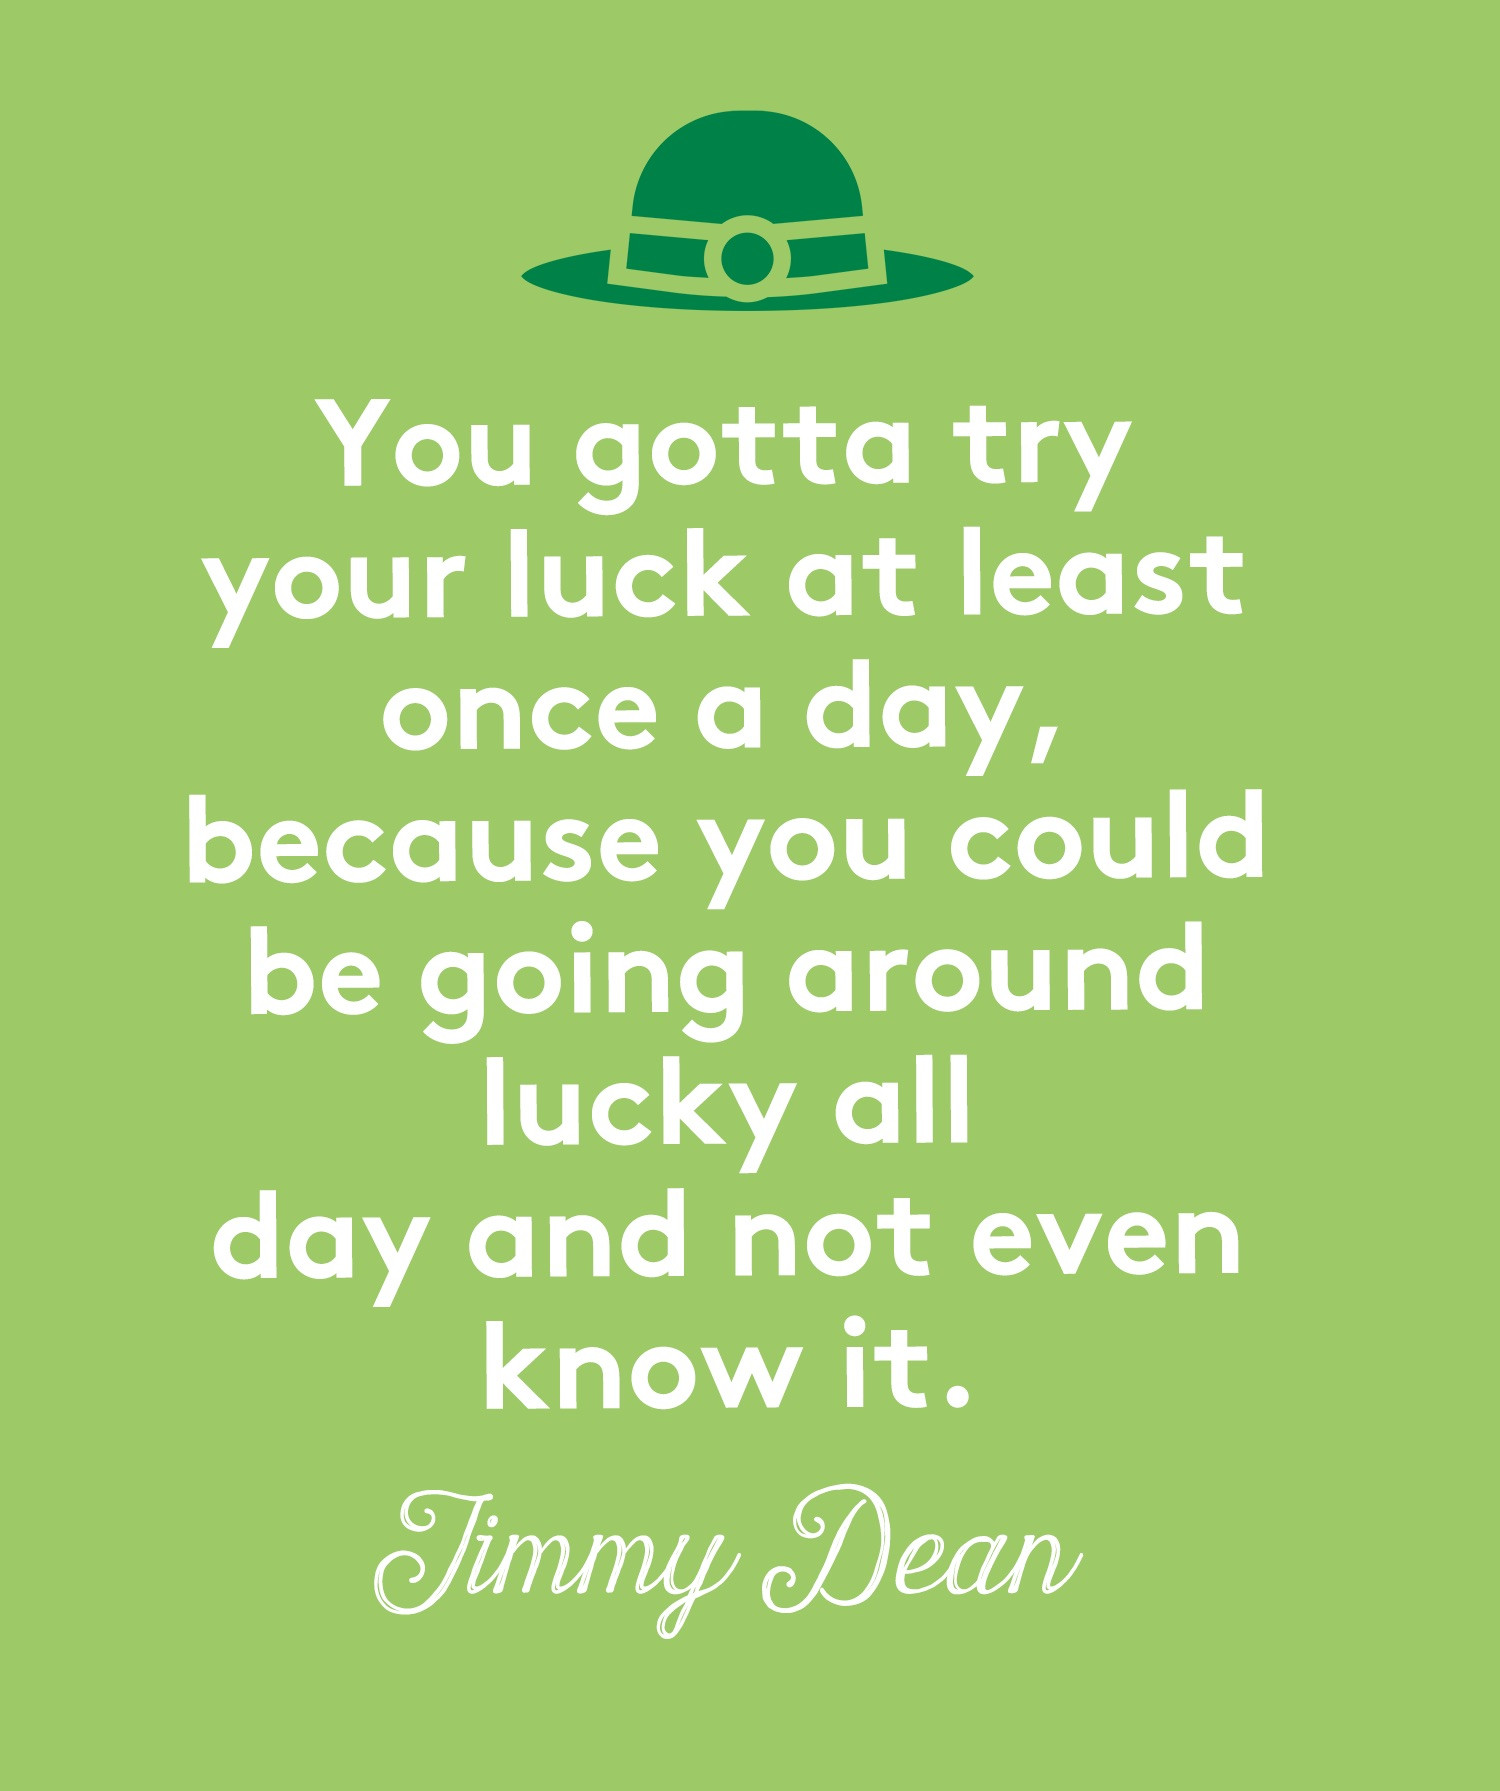 St Patrick's Day Drinking Quotes
 9 St Patrick’s Day Memes and Quotes You’ll Send to